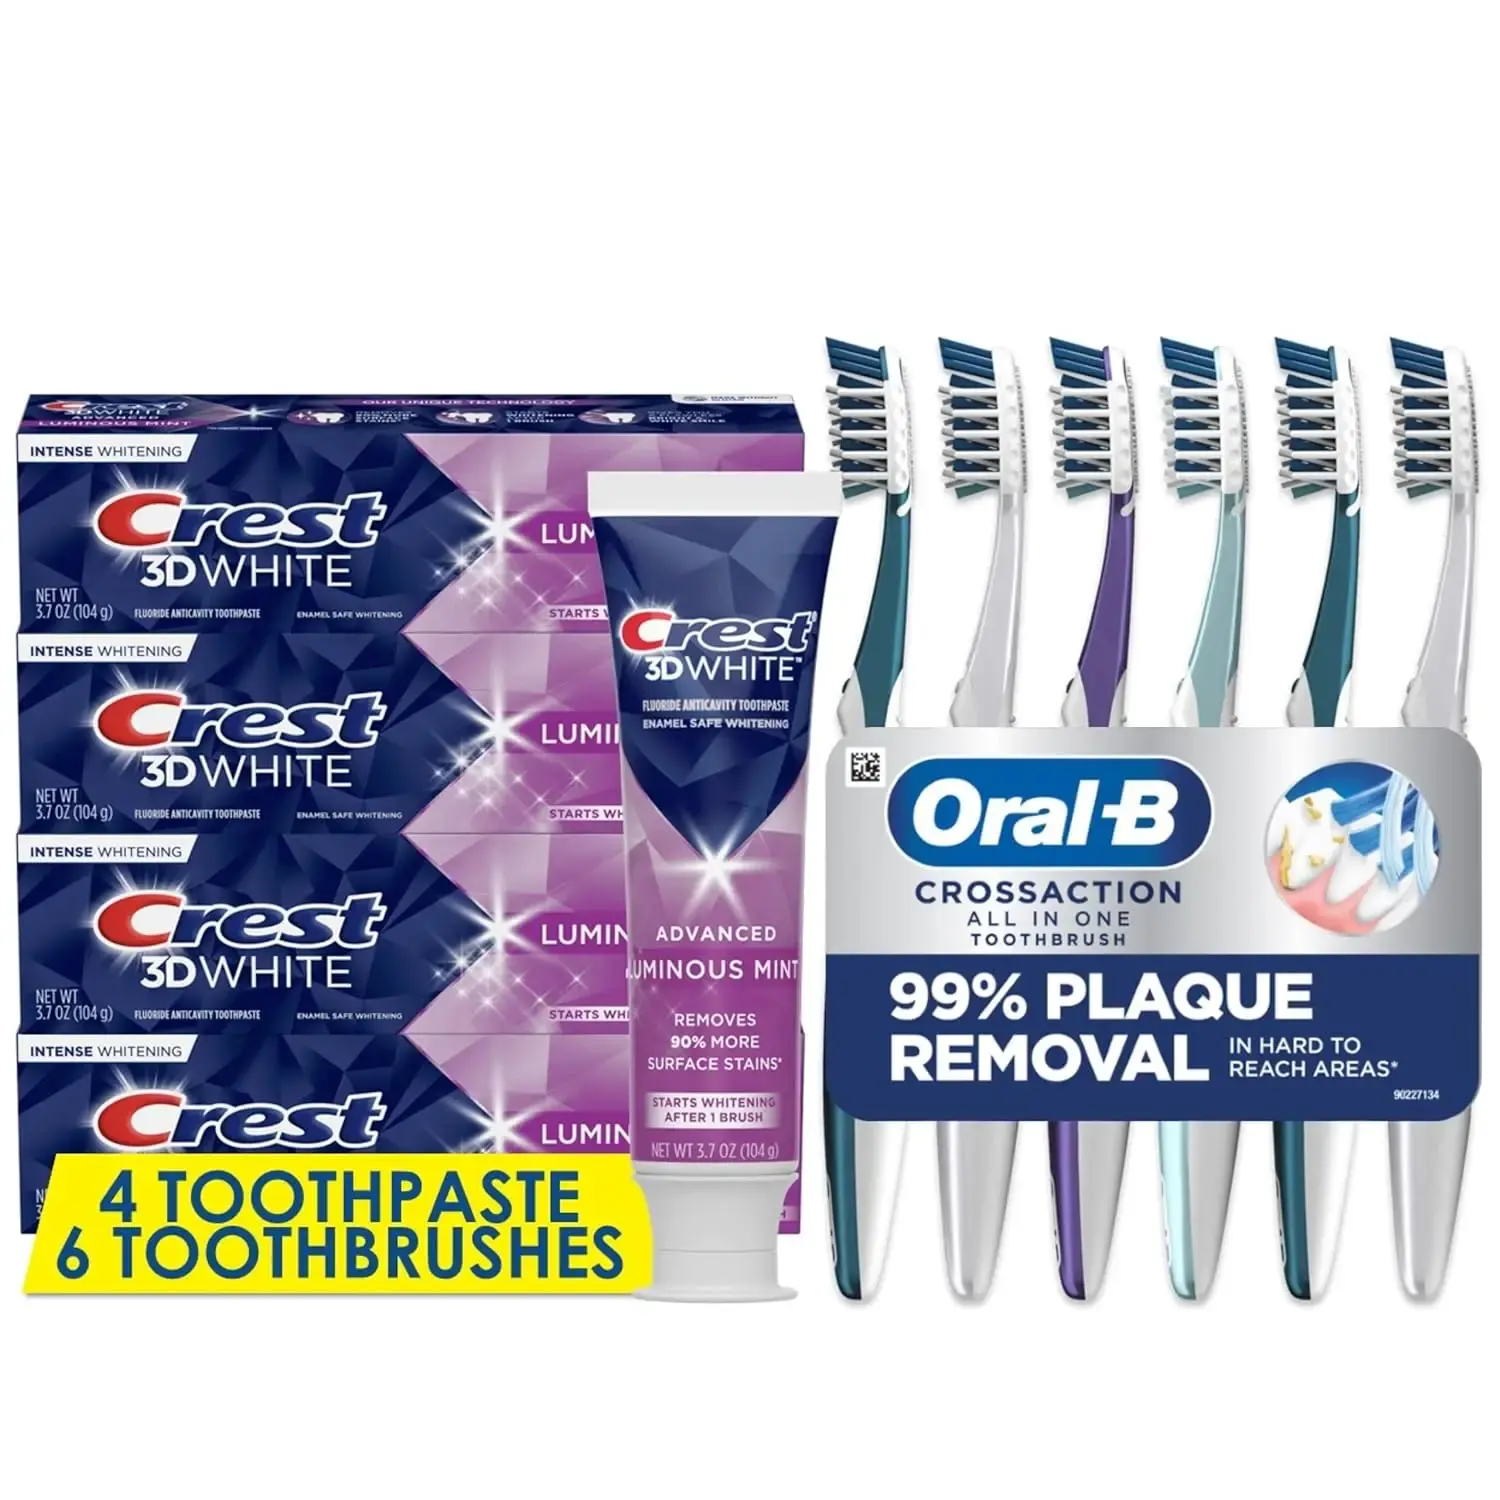 Oral-B CrossAction Soft Toothbrushes, Deep Plaque Removal (6 Count) + Crest 3D White Toothpaste 3.7 Oz (Pack of 4)